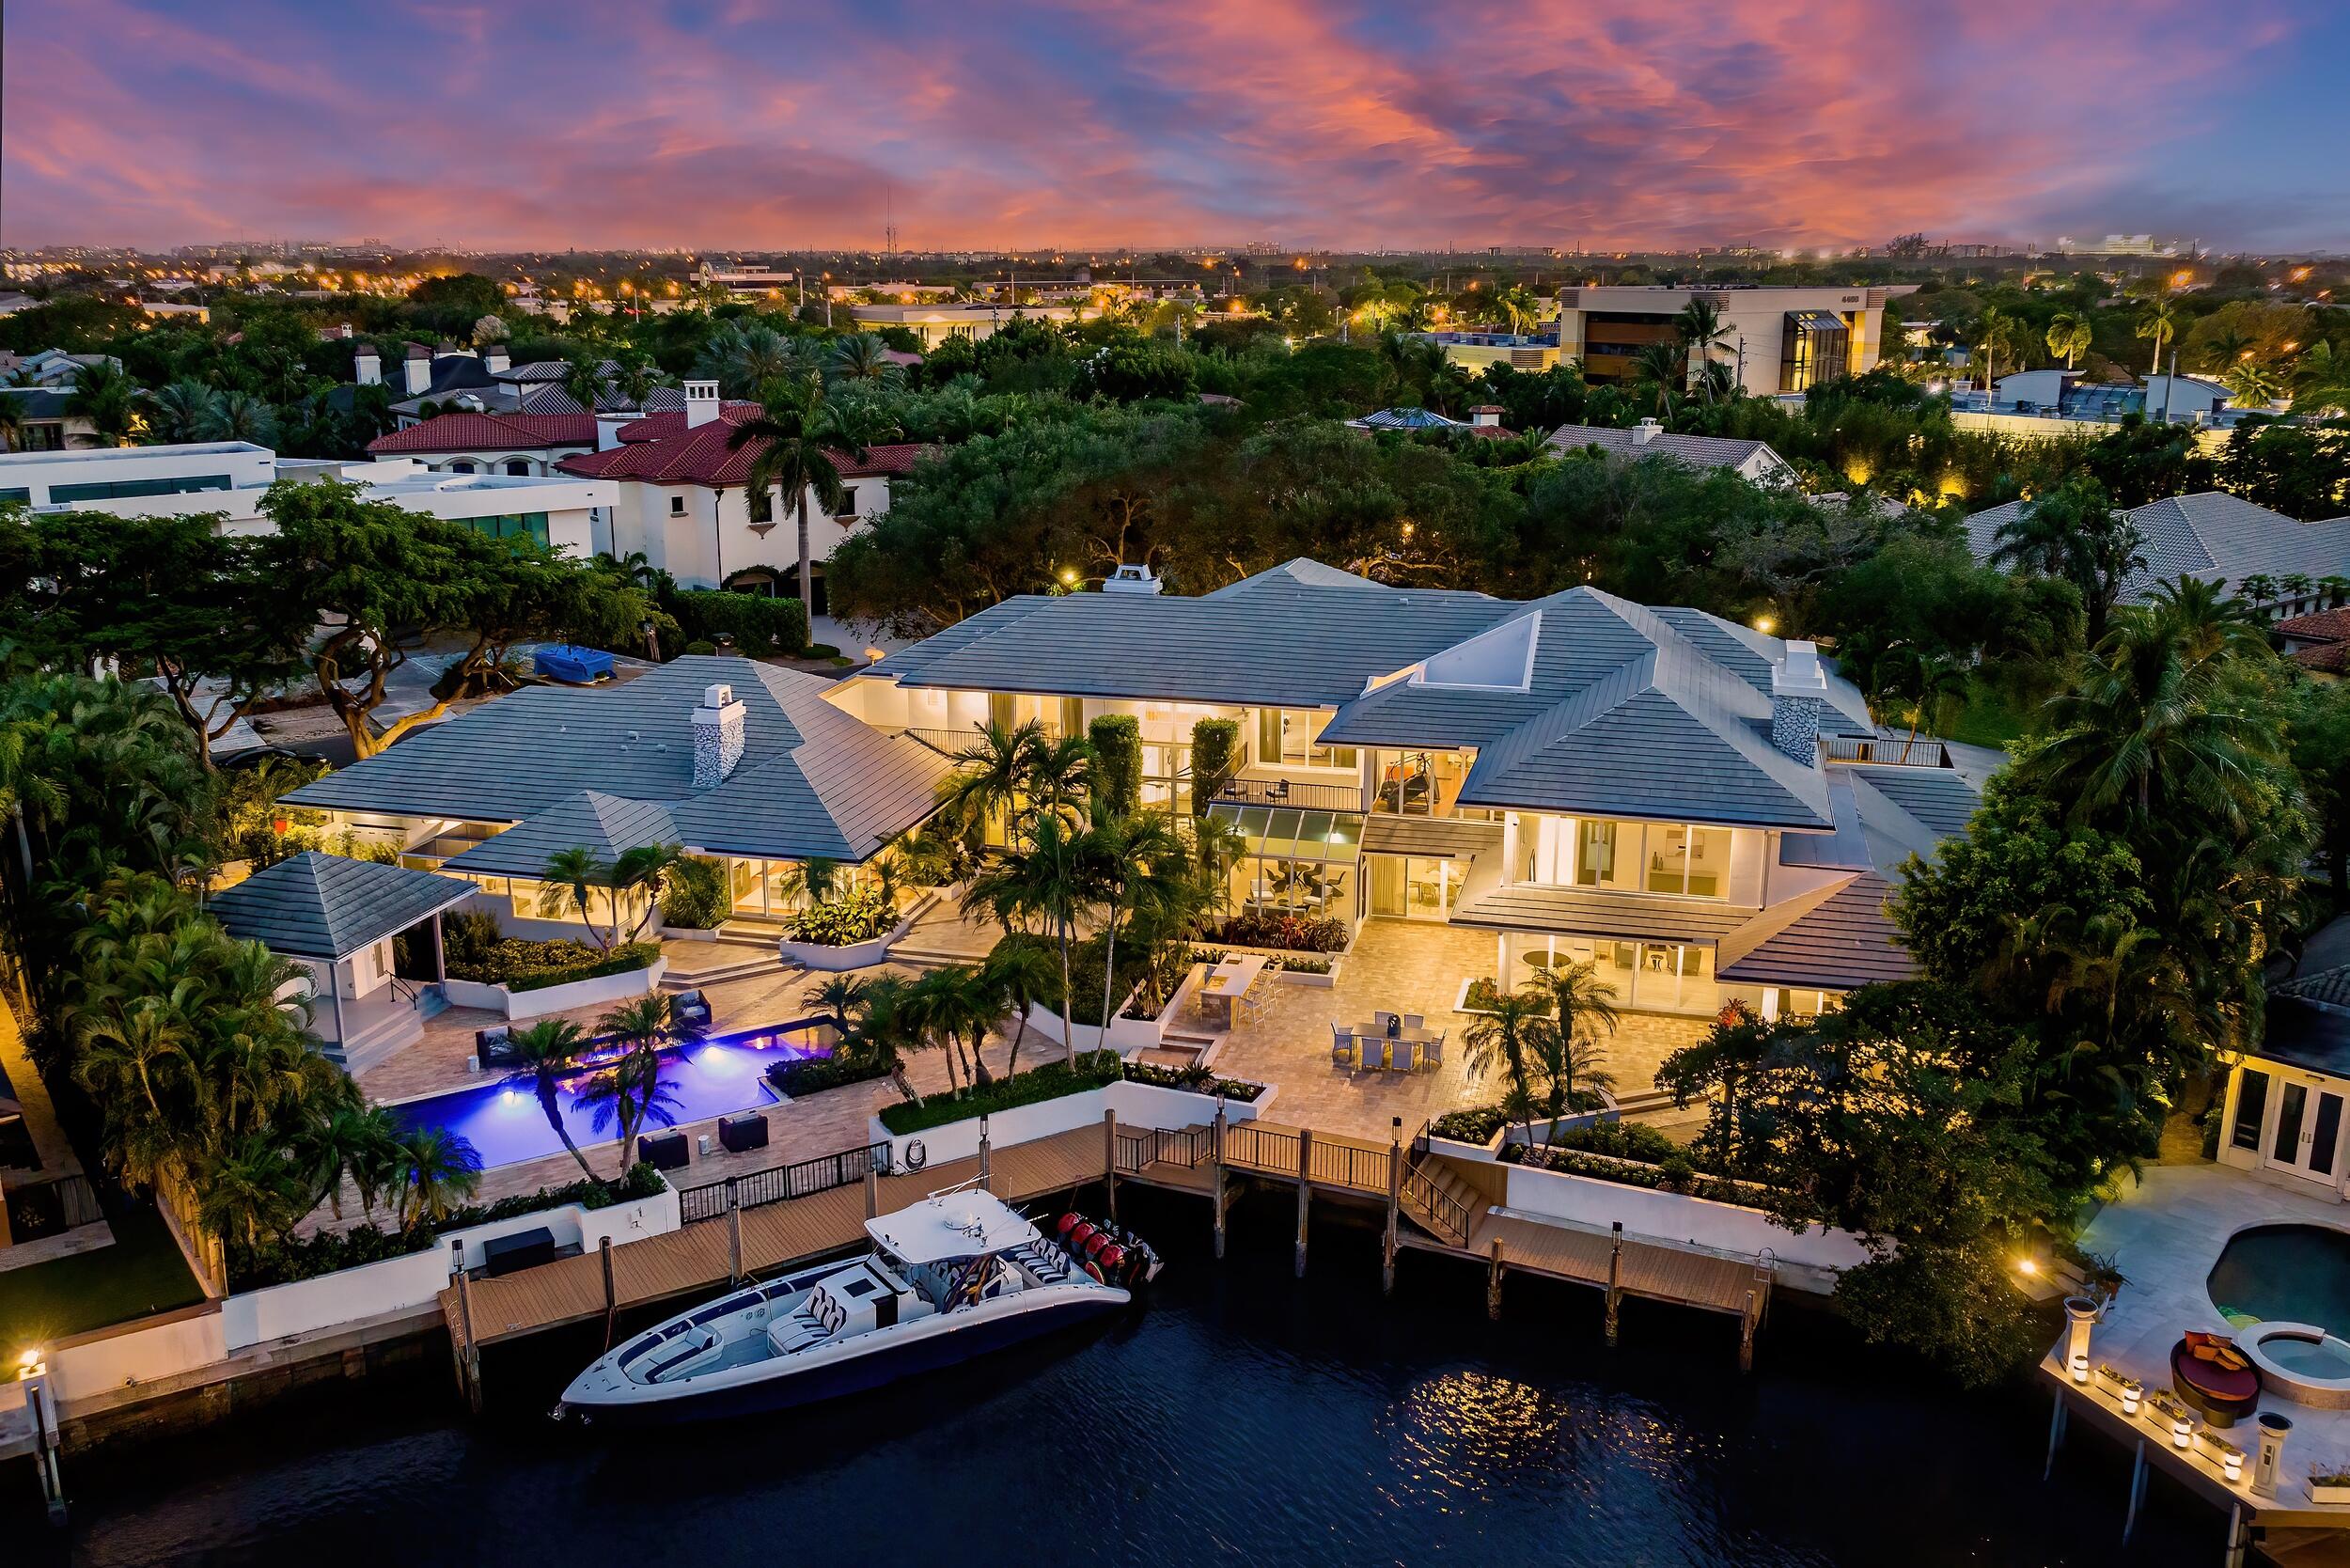 Extraordinary value in the most highly sought after gated waterfront community in East Boca Raton. The price has been adjusted for immediate sale. The Sanctuary, a private enclave in Boca Raton listed by Forbes as one of the most exclusive gated communities in the United States, provides an appropriate setting for this contemporary masterpiece sited on two prized waterfront lots. This 12,000-square-foot estate is cast in elegance, artful accents, and resort-style sophistication. A broad canopy of arching tree branches provides cover leading to a gated courtyard entrance. It's a thread of chic comfort and mesmerizing awe that extends throughout the five-bedroom layout (with 7 1/2 baths). with bright white stone countertops and cabinetry, Wolf and Sub-Zero appliances, a private butler's pantry, a separate storage room, and an oversized island with 360-degree storage, and a temperature-controlled Vindegarde designer wine vault. 

The kitchen and adjoining breakfast area open to an outdoor covered dining and entertaining space, perfect for enjoying a morning cup of coffee while reveling in the splendor of the estate's beautifully appointed outdoor spaces. The expansive primary quarters, spread across the entire south wing of the property, boasts a full menu of luxury features. Highlights include a sitting room/living space with a gas fireplace, an adjoining home office, oversized boutique-style closets with custom shelving (including a bonus cedar closet), and a mammoth spa-like bathroom with steam shower and soaking tub. Sliding doors off the primary bath open to a screened outdoor relaxation and massage area, complete with a soothing Bali-inspired water feature. The indoor-outdoor flow of the home seamlessly integrates entertaining spaces along the north wing of the main floor, including a theater room (with a 120-inch screen and comfortable seating for 14), and a wellness area just off the lounge with a state-of-the-art gym, full bath and commercial-sized dry sauna by Helo Finland. 

The sense of serenity and style extends to an exquisite exterior, highlighted by a saltwater pool with sun shelf and spa that overlooks the property's 140 feet of water frontage (with direct ocean access). The richly landscaped outdoor area&#x14;enhanced by dramatic nighttime lighting&#x14;also includes a summer kitchen, and a standalone cabana pavilion with a full bath and ample storage. Meanwhile, the 120-foot angled dock, with room to host two yachts, is equipped with 30 amp shore power connection. Additional living amenities include an upstairs gym, maid/au-pair quarters with separate entrance, a glass elevator, a four-bay garage with an adjoining workshop, and private balconies off each upstairs guest bedroom. As for the prehistoric element, a striking artifact in the great room dating back some 70 million years offers a rare glimpse into our past. For a full-ask offer, the seller will include a display piece like no other as part of the purchase&#x14;the skull of a Mosasaur dinosaur. These large marine creatures dominated the ocean as apex predators during the late Cretaceous period; most were 30 feet to 50 feet in length.

Sophisticated resort-style living awaits.